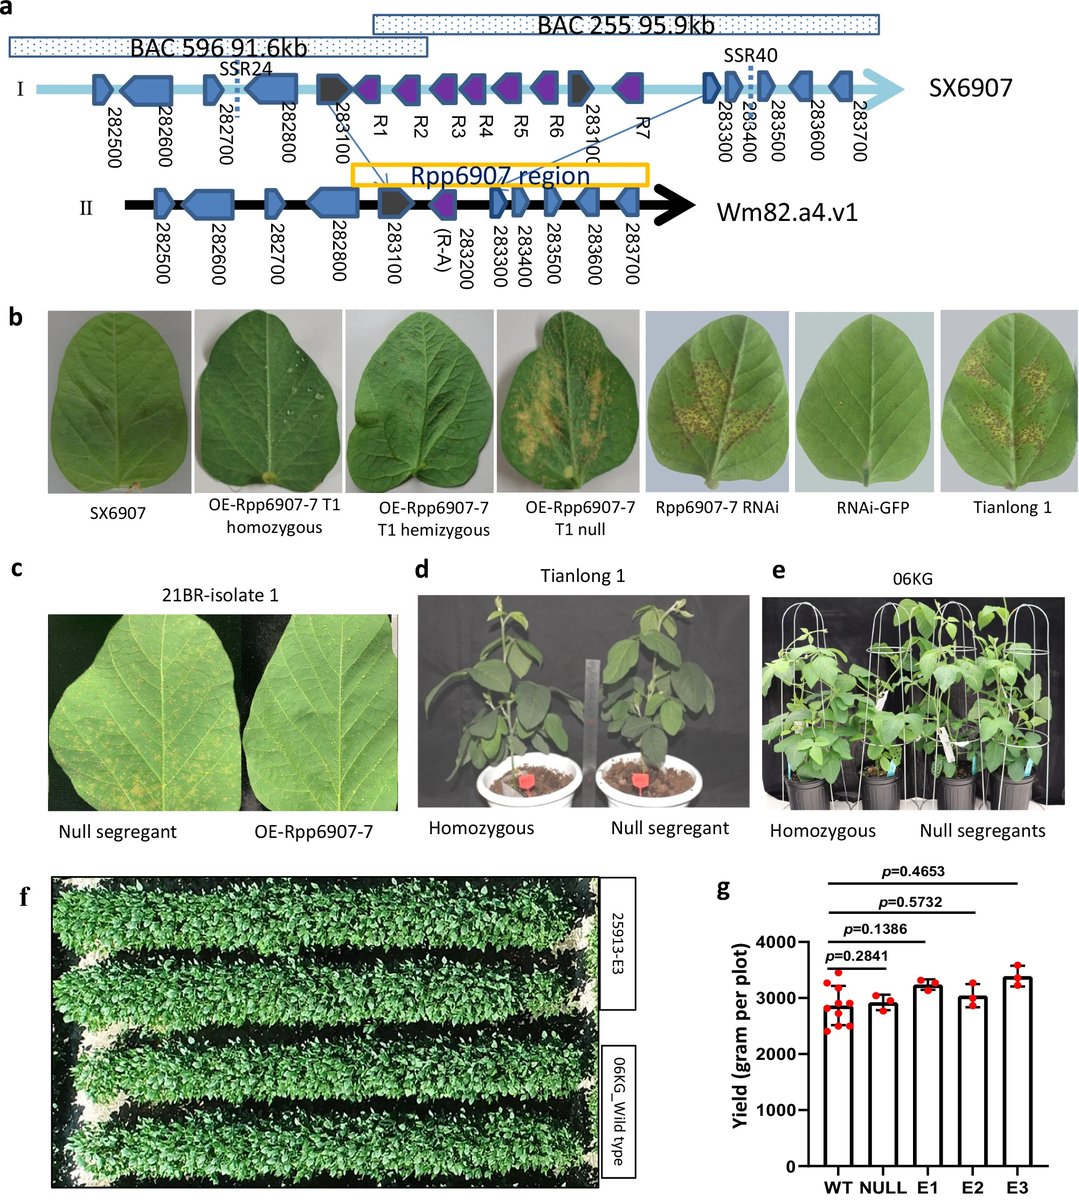 China has achieved the world's first #soybean gene #clone on the locus that provides resistance against Asian soybean rust (ASR), one of the major biotic threats to #agriculture worldwide causing a yield loss of 40%-80%, bringing hope to soybean growing areas. @NatureComms